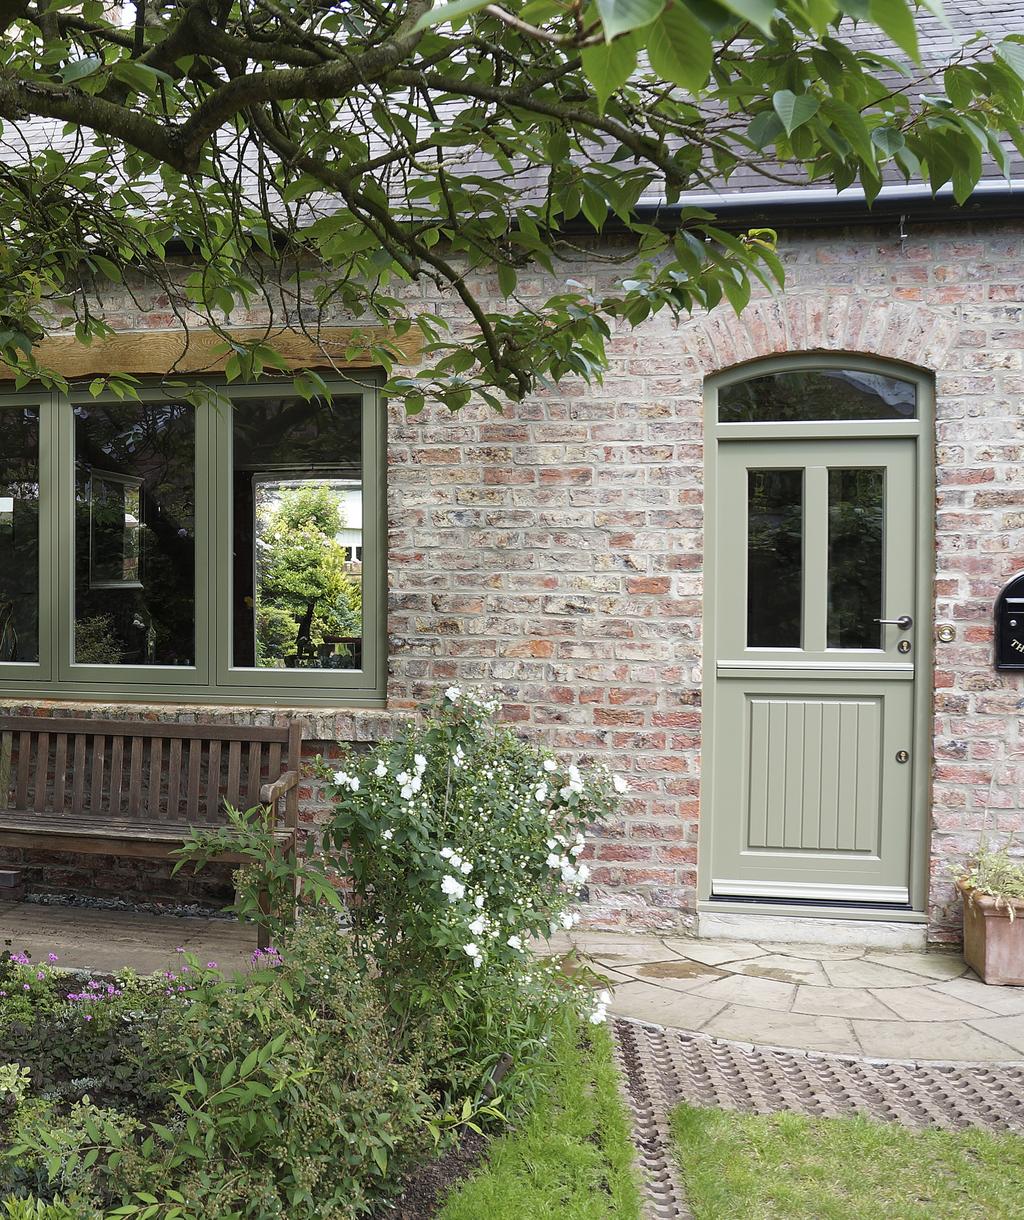 Traditionally, Stable Doors were primarily used on farms where livestock and horses are kept due to their practical features, but over the last half-century they have become an increasingly popular